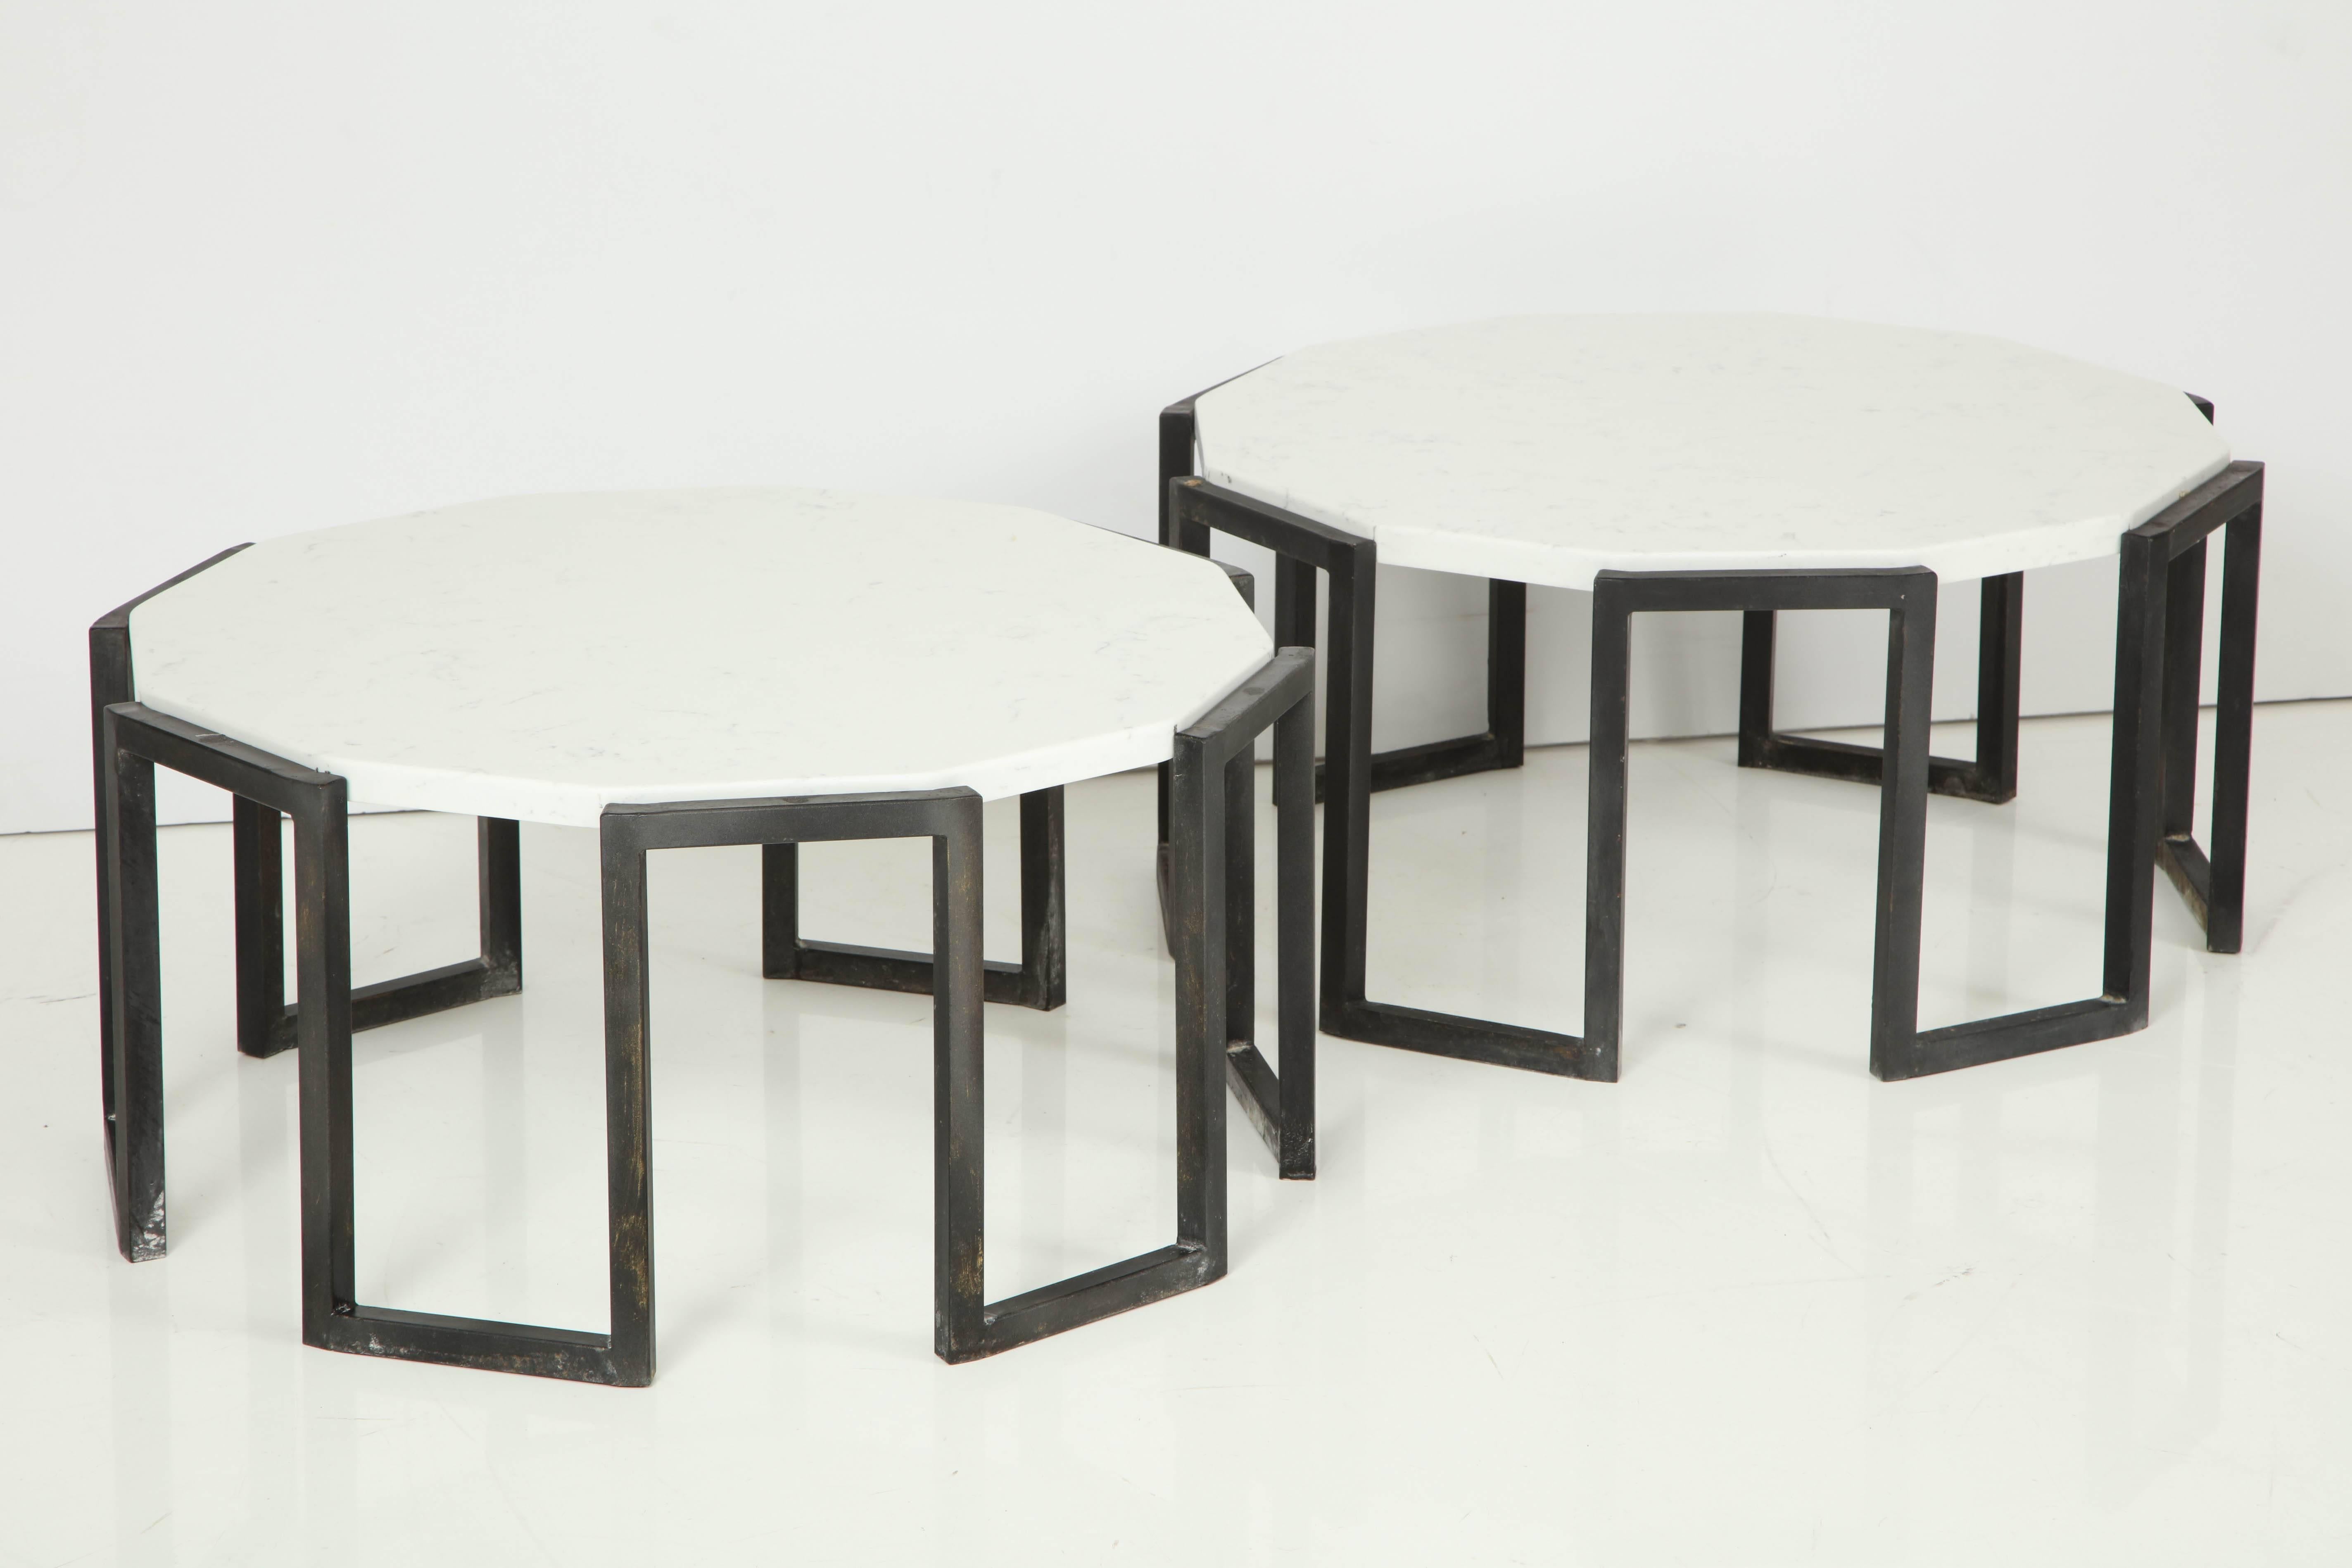 Elegant pair of crenelated tables, patinated wrought iron and travertine, France, mid-1950s.
Price for one.